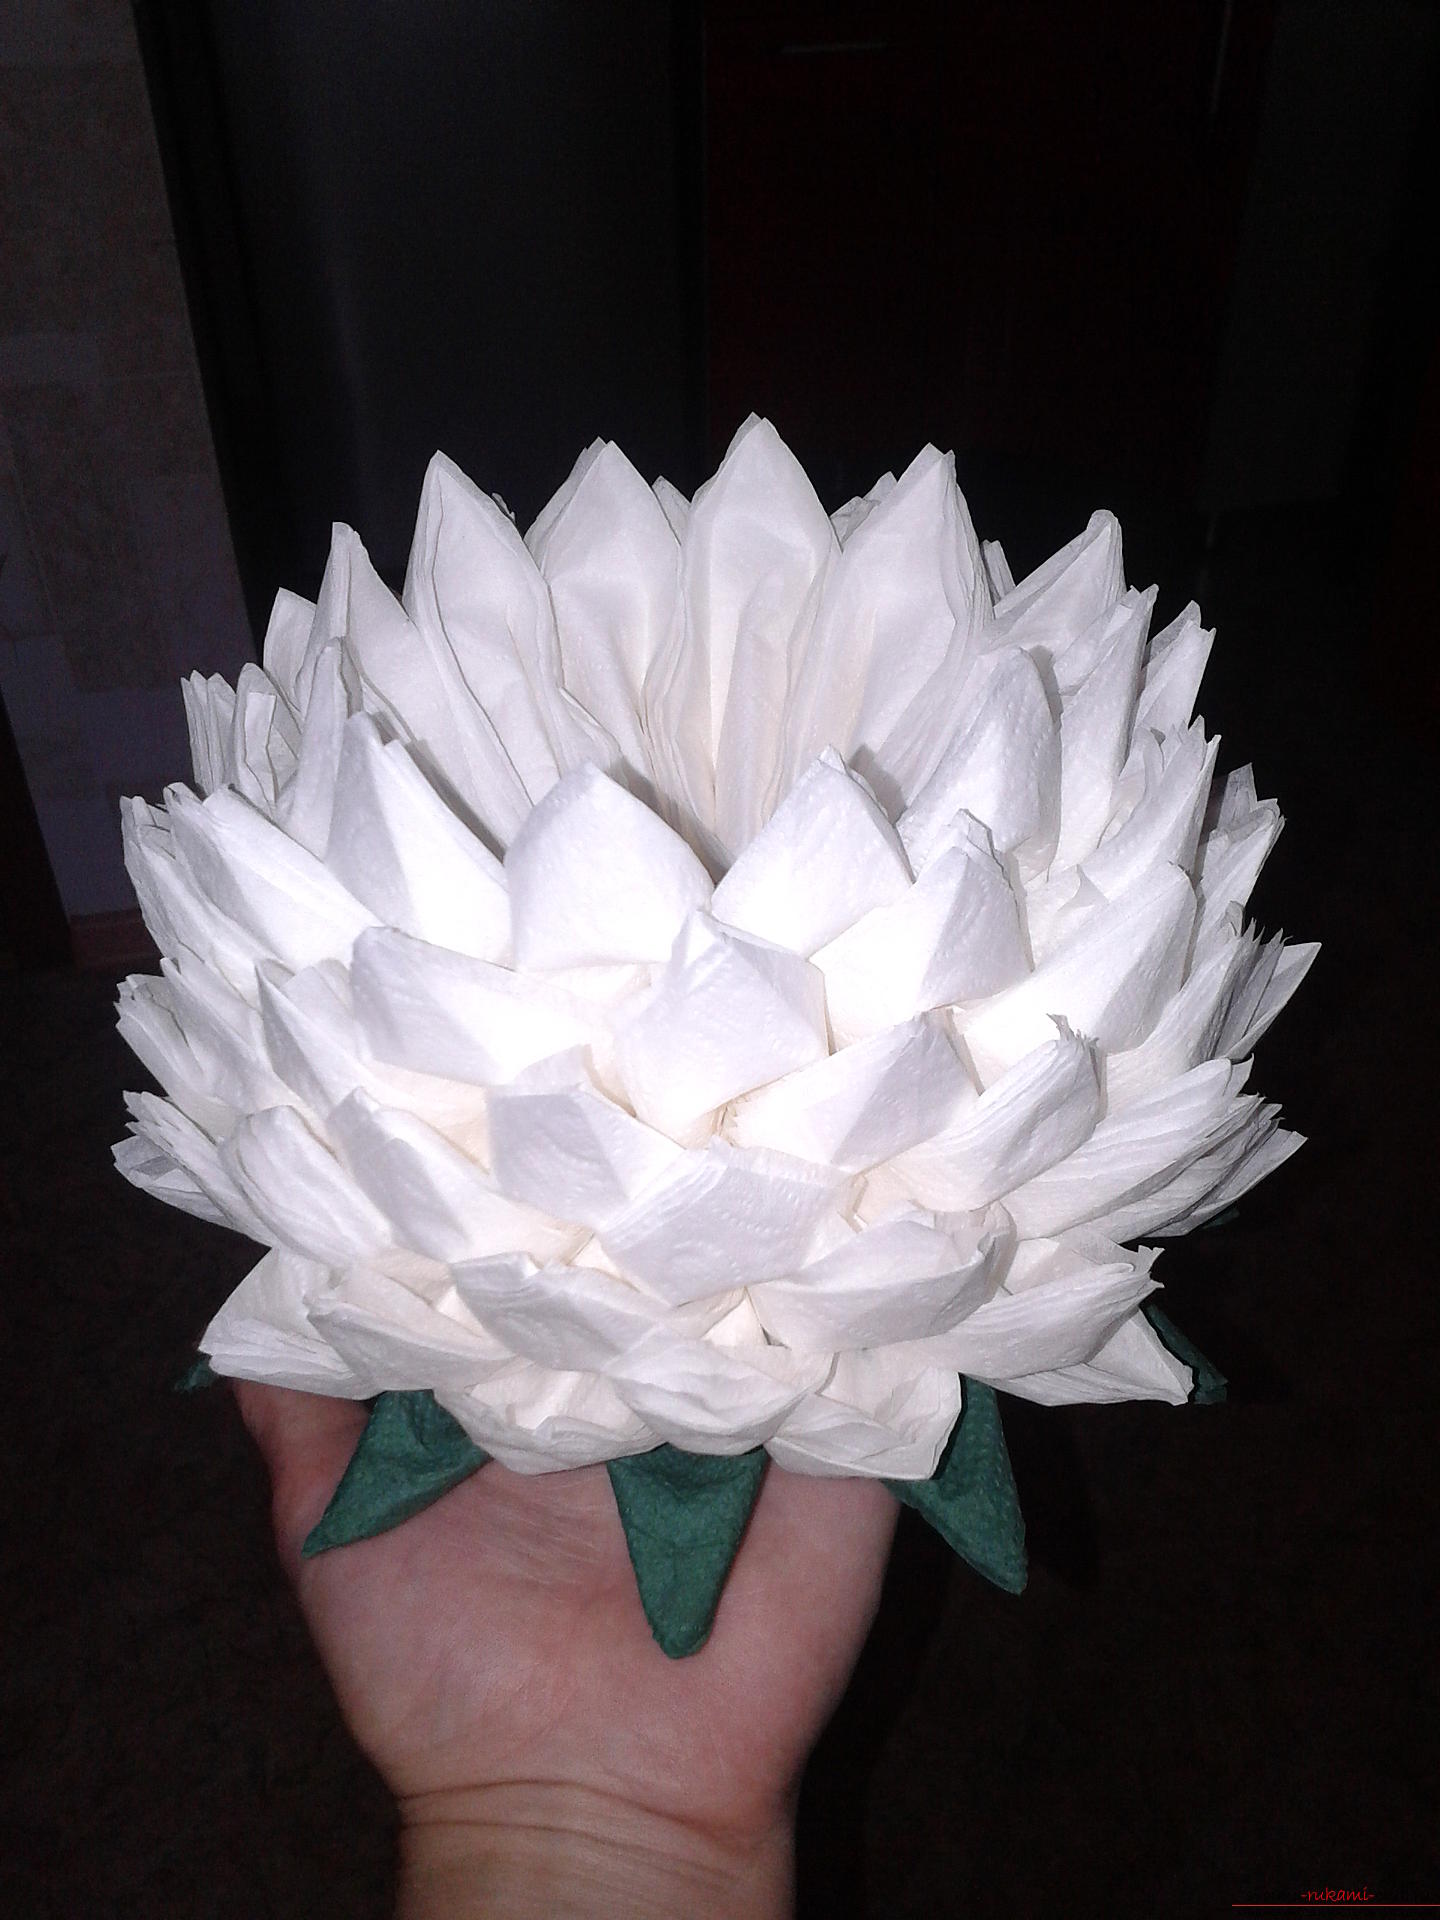 Amazing crafts made of napkins can make even children, the lotus flower is made from kitchen white napkins .. Photo # 1